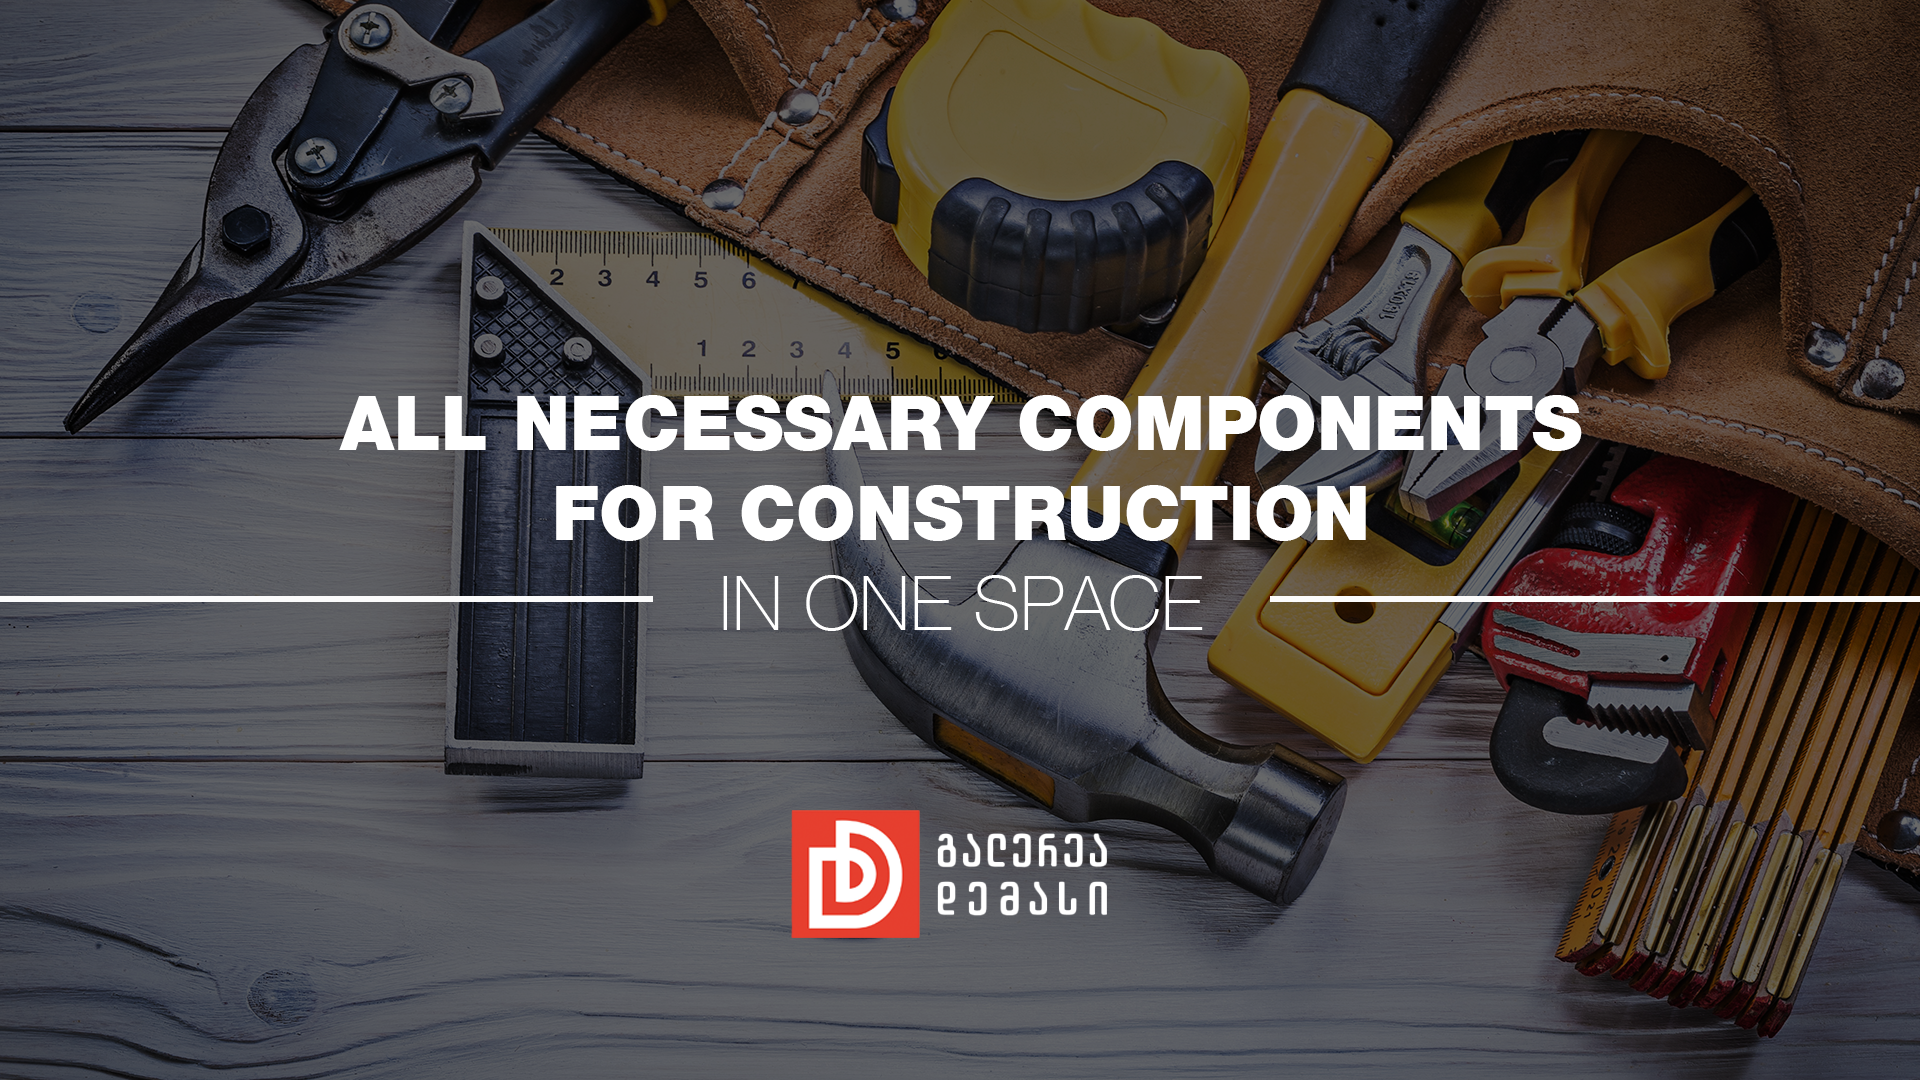 All necessary construction components in one space - Ideali